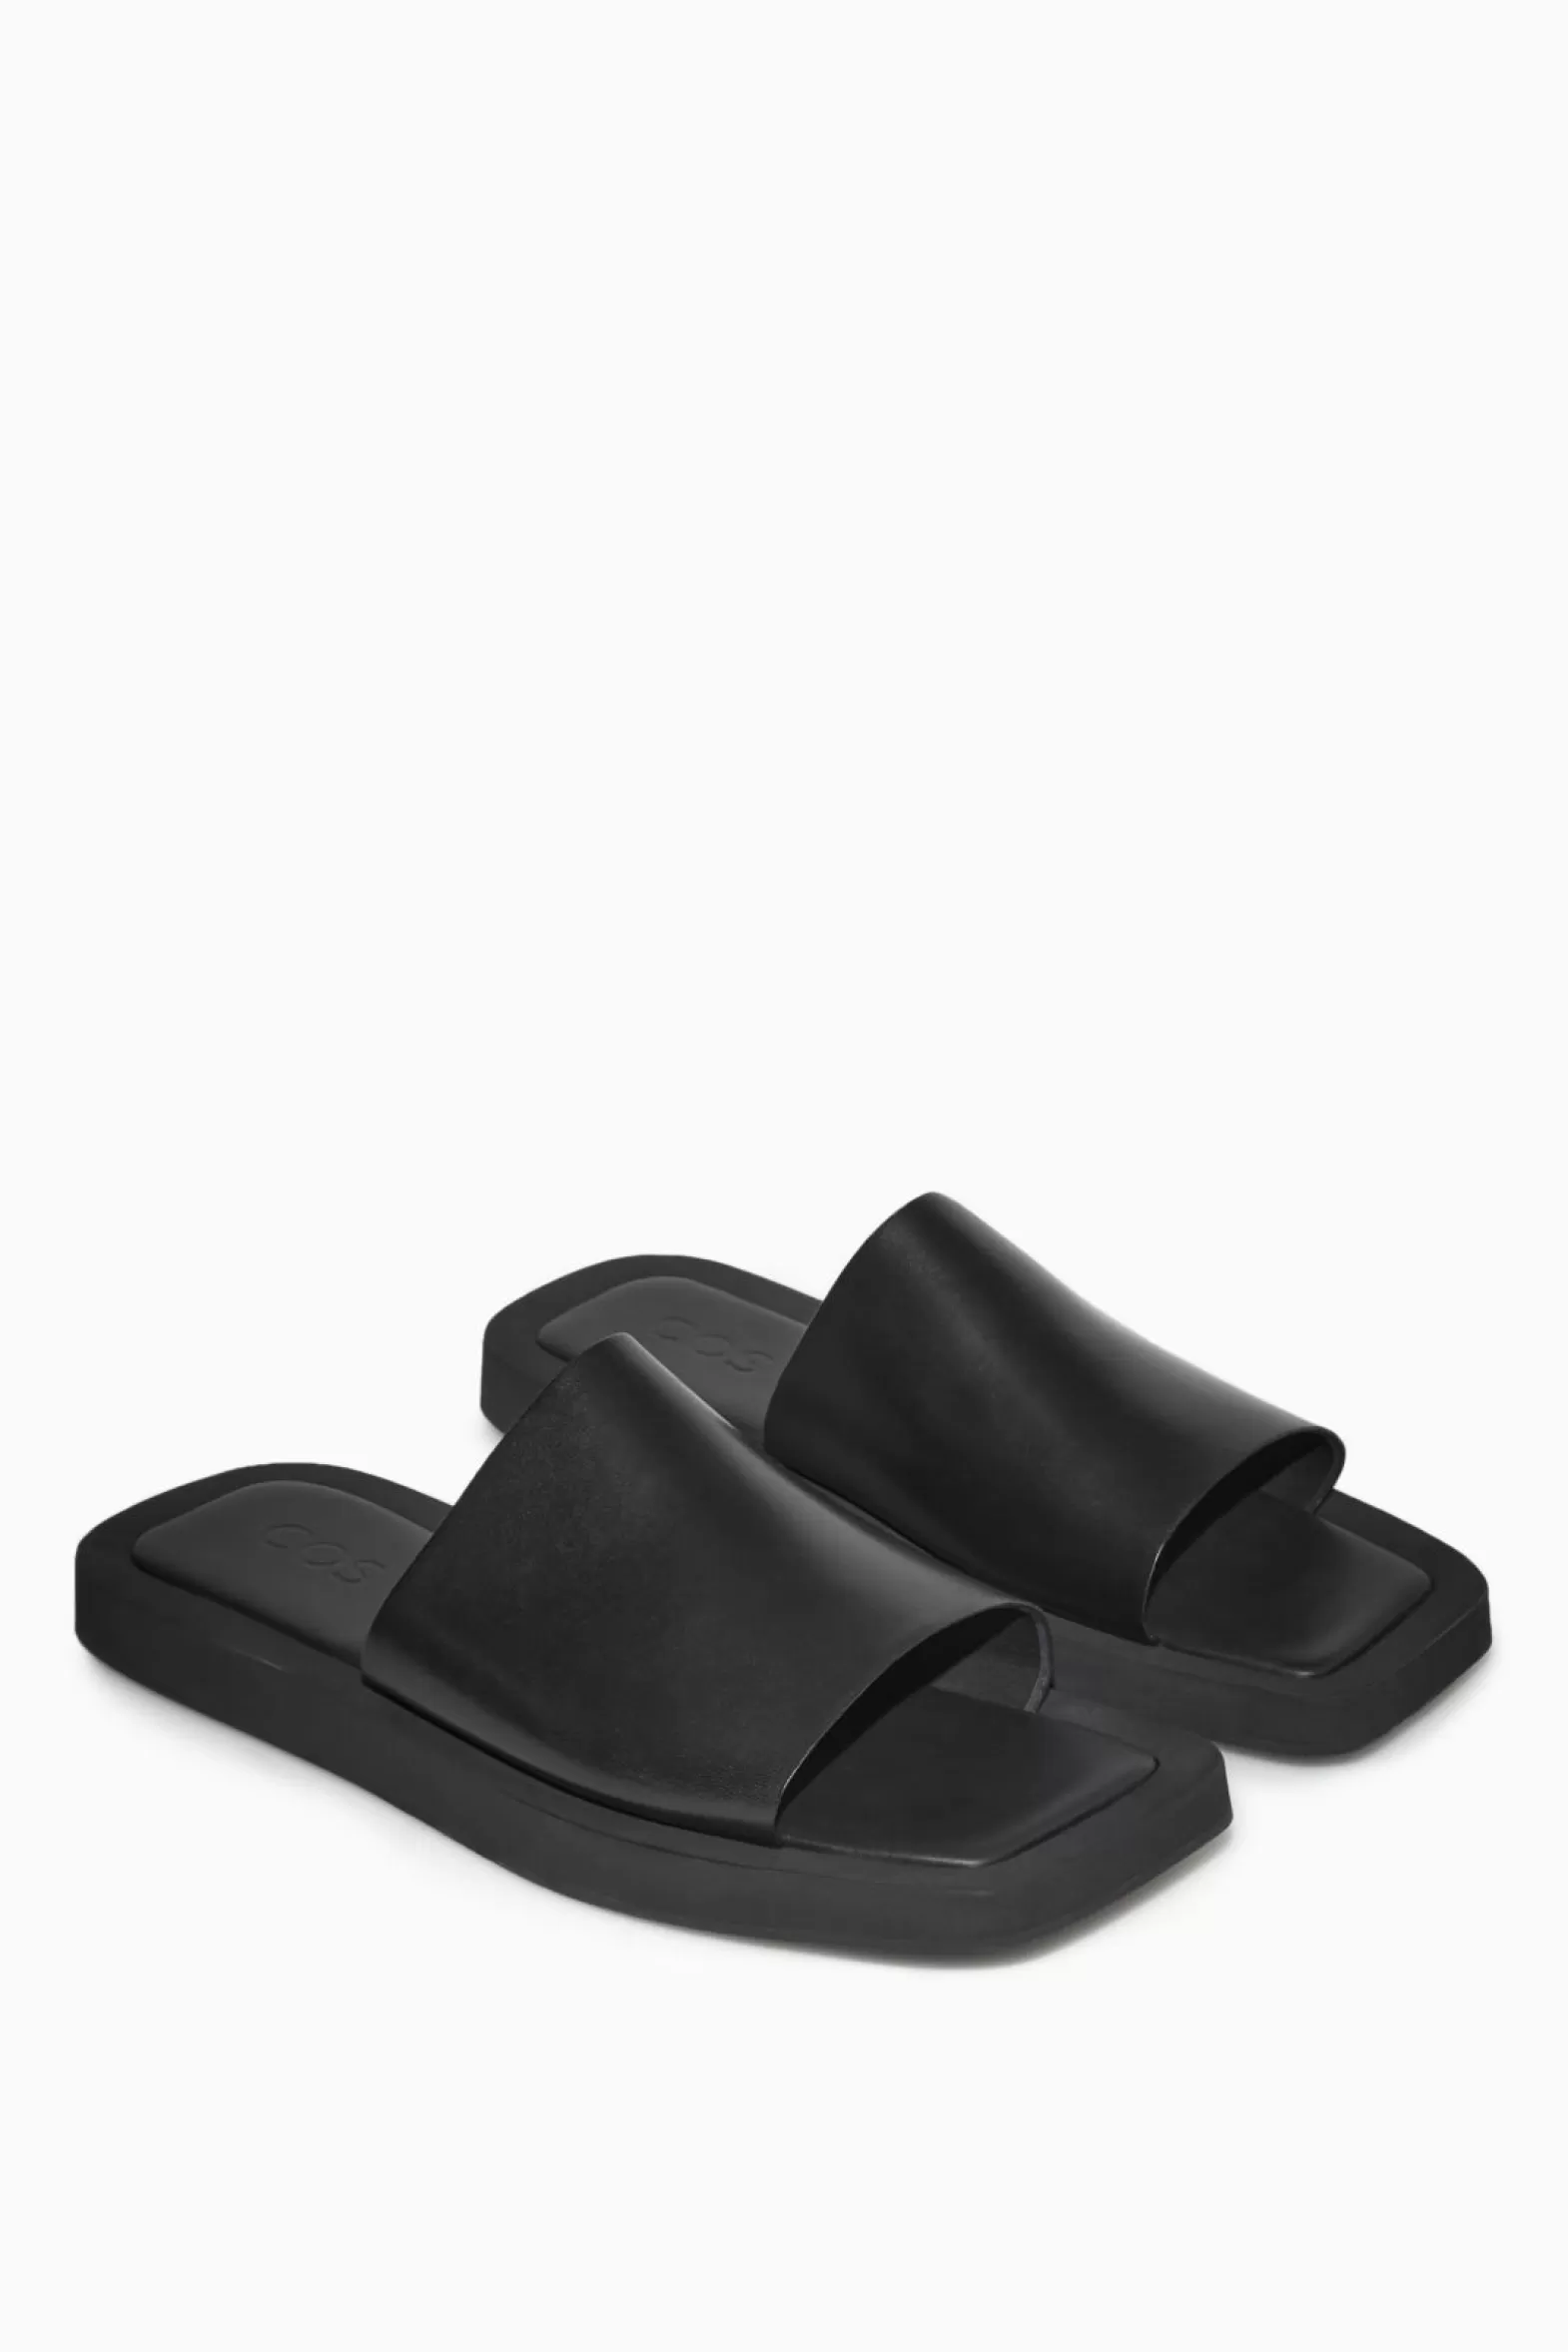 COS SQUARE-TOE LEATHER SLIDES